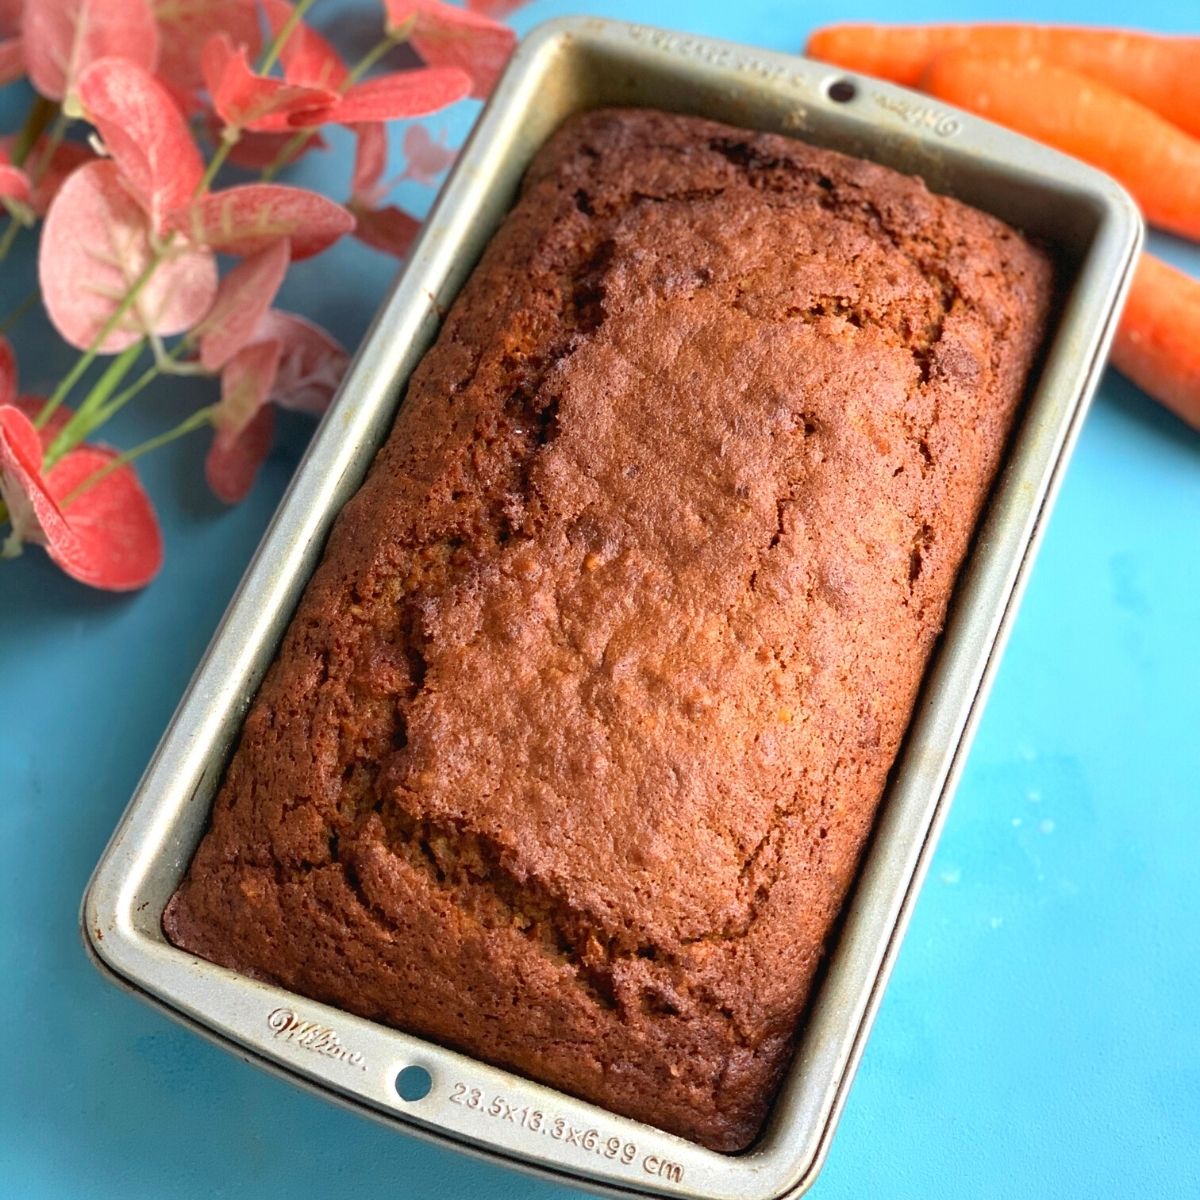 Whole Wheat Carrot Cake is a simple, quick and delicious moist cake. The cake is perfect for tea time or any festive celebrations.